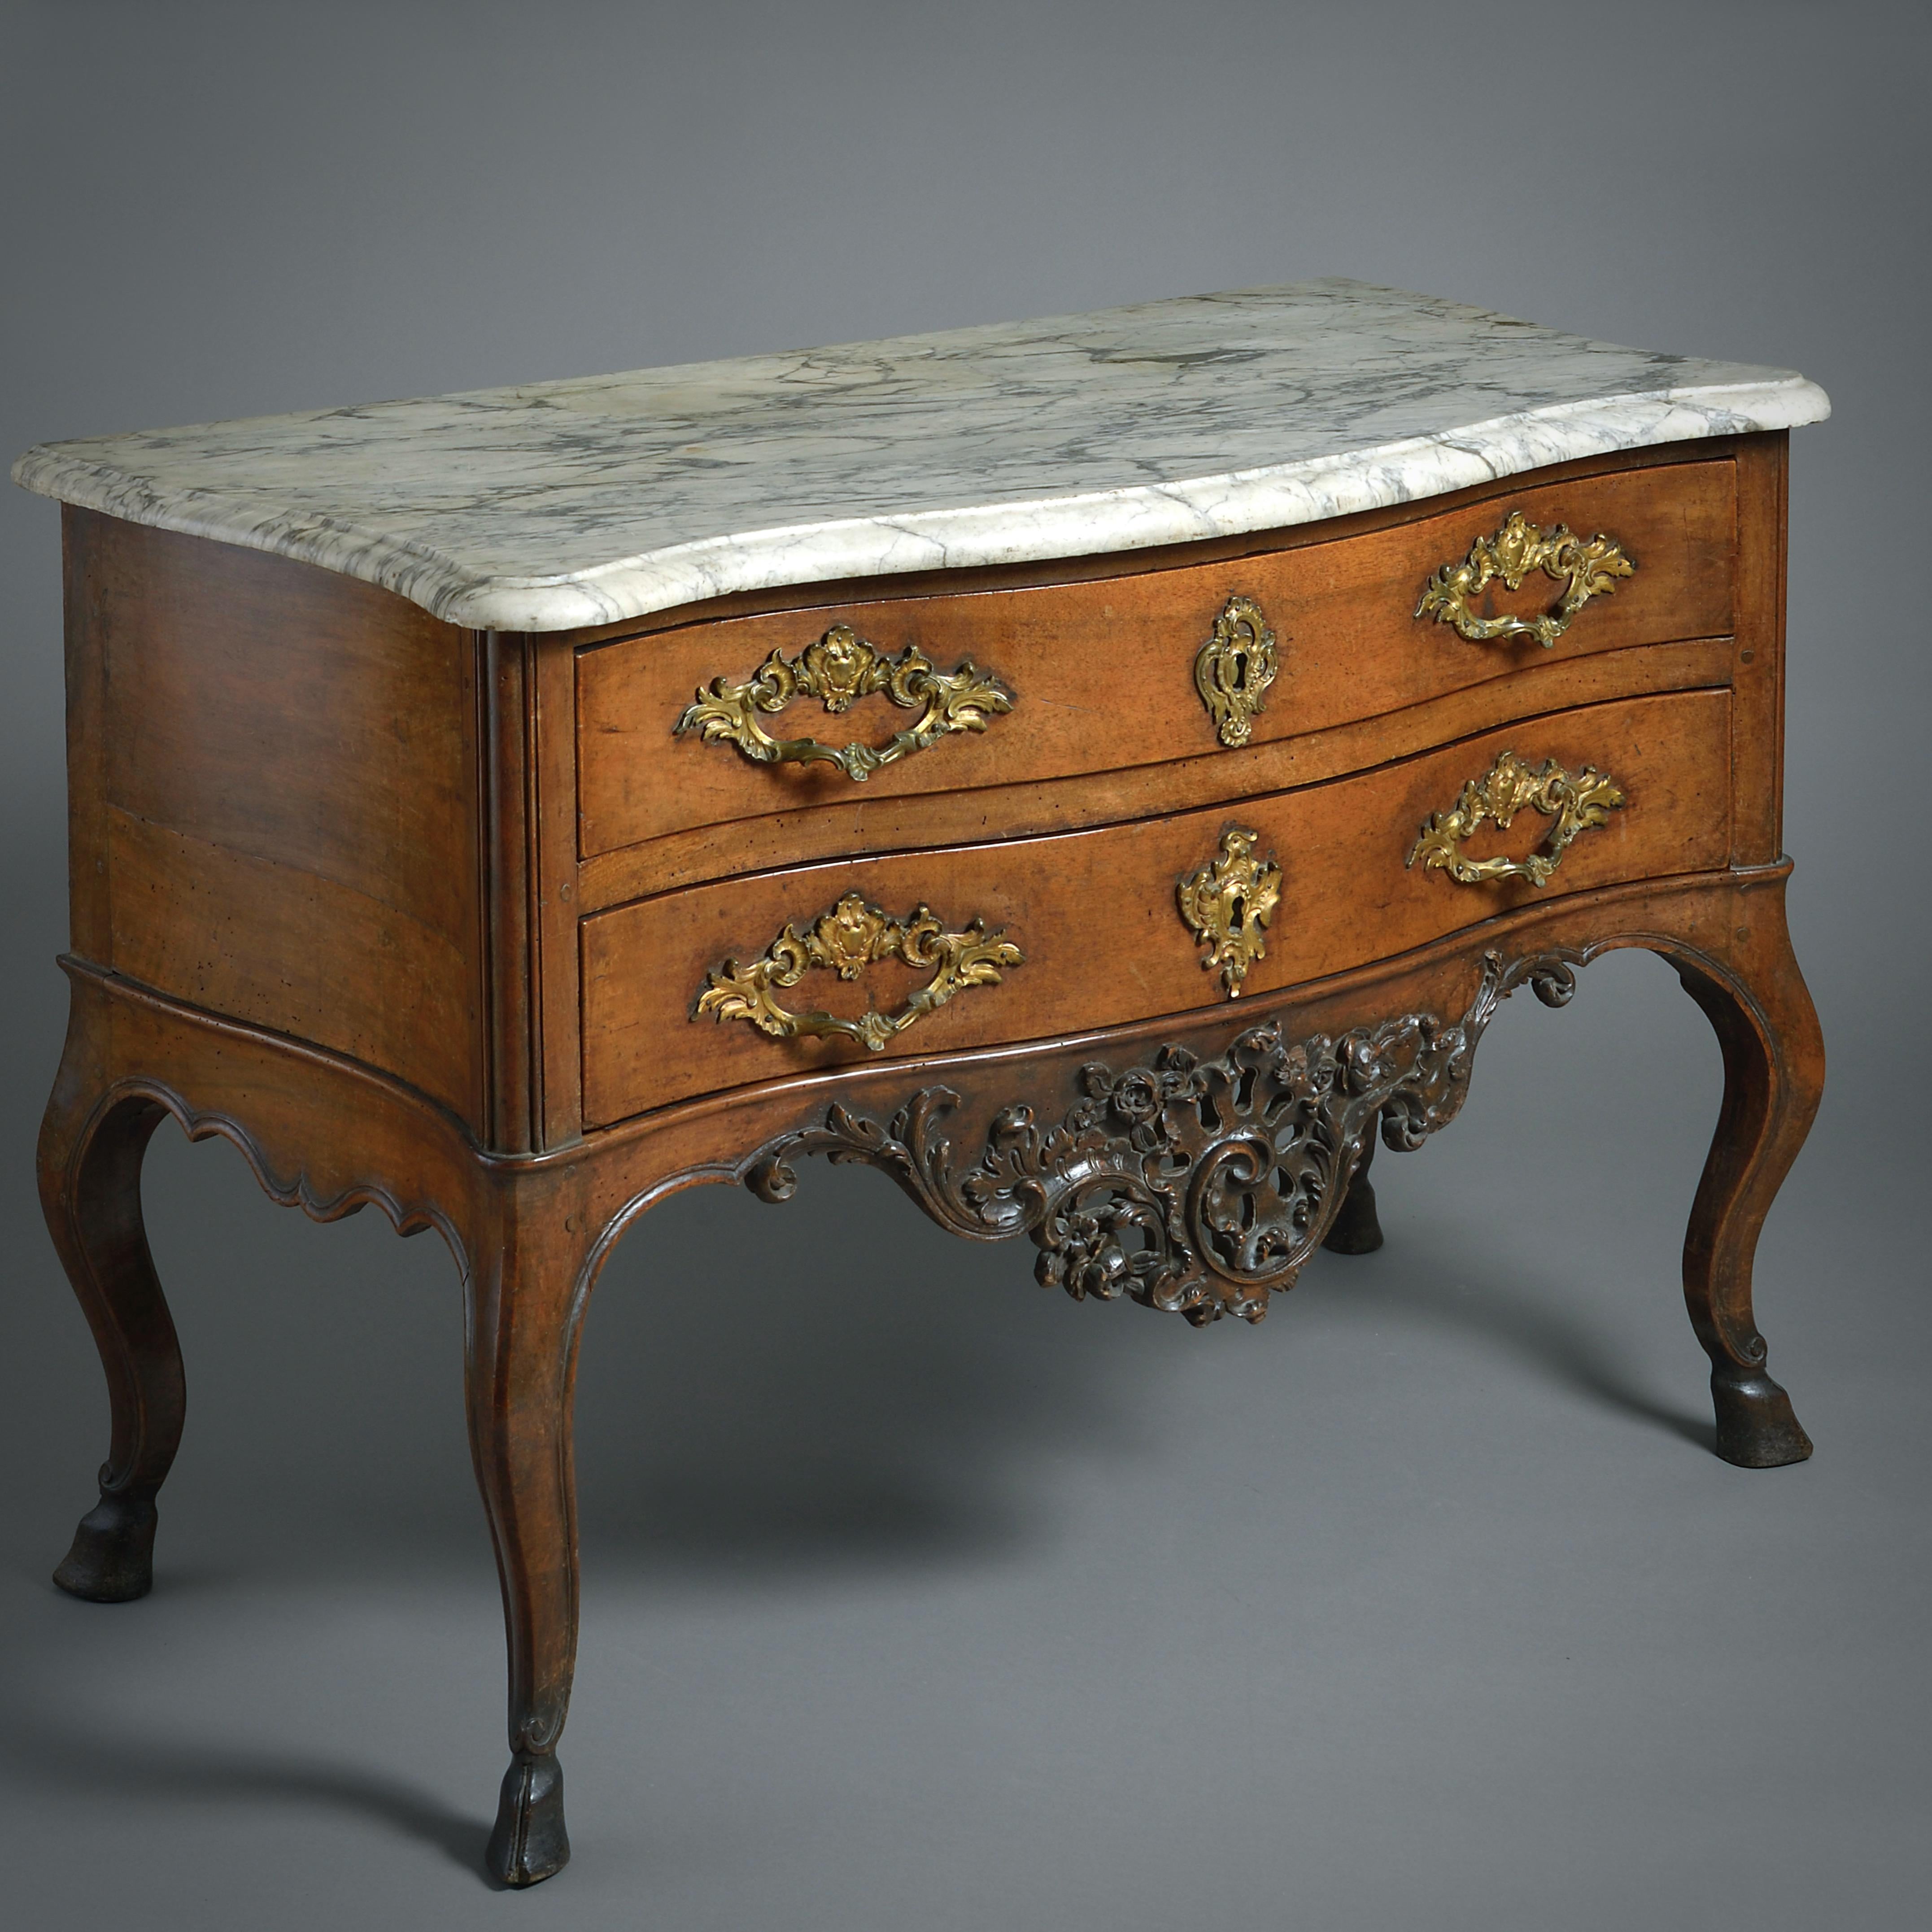 A fine Louis XV provincial ormolu-mounted walnut commode, Rhone valley, circa 1750.

With its original veined Carrara marble top above two drawers and an elaborately carved and pierced apron on cabriole legs with cloven-hoof feet.